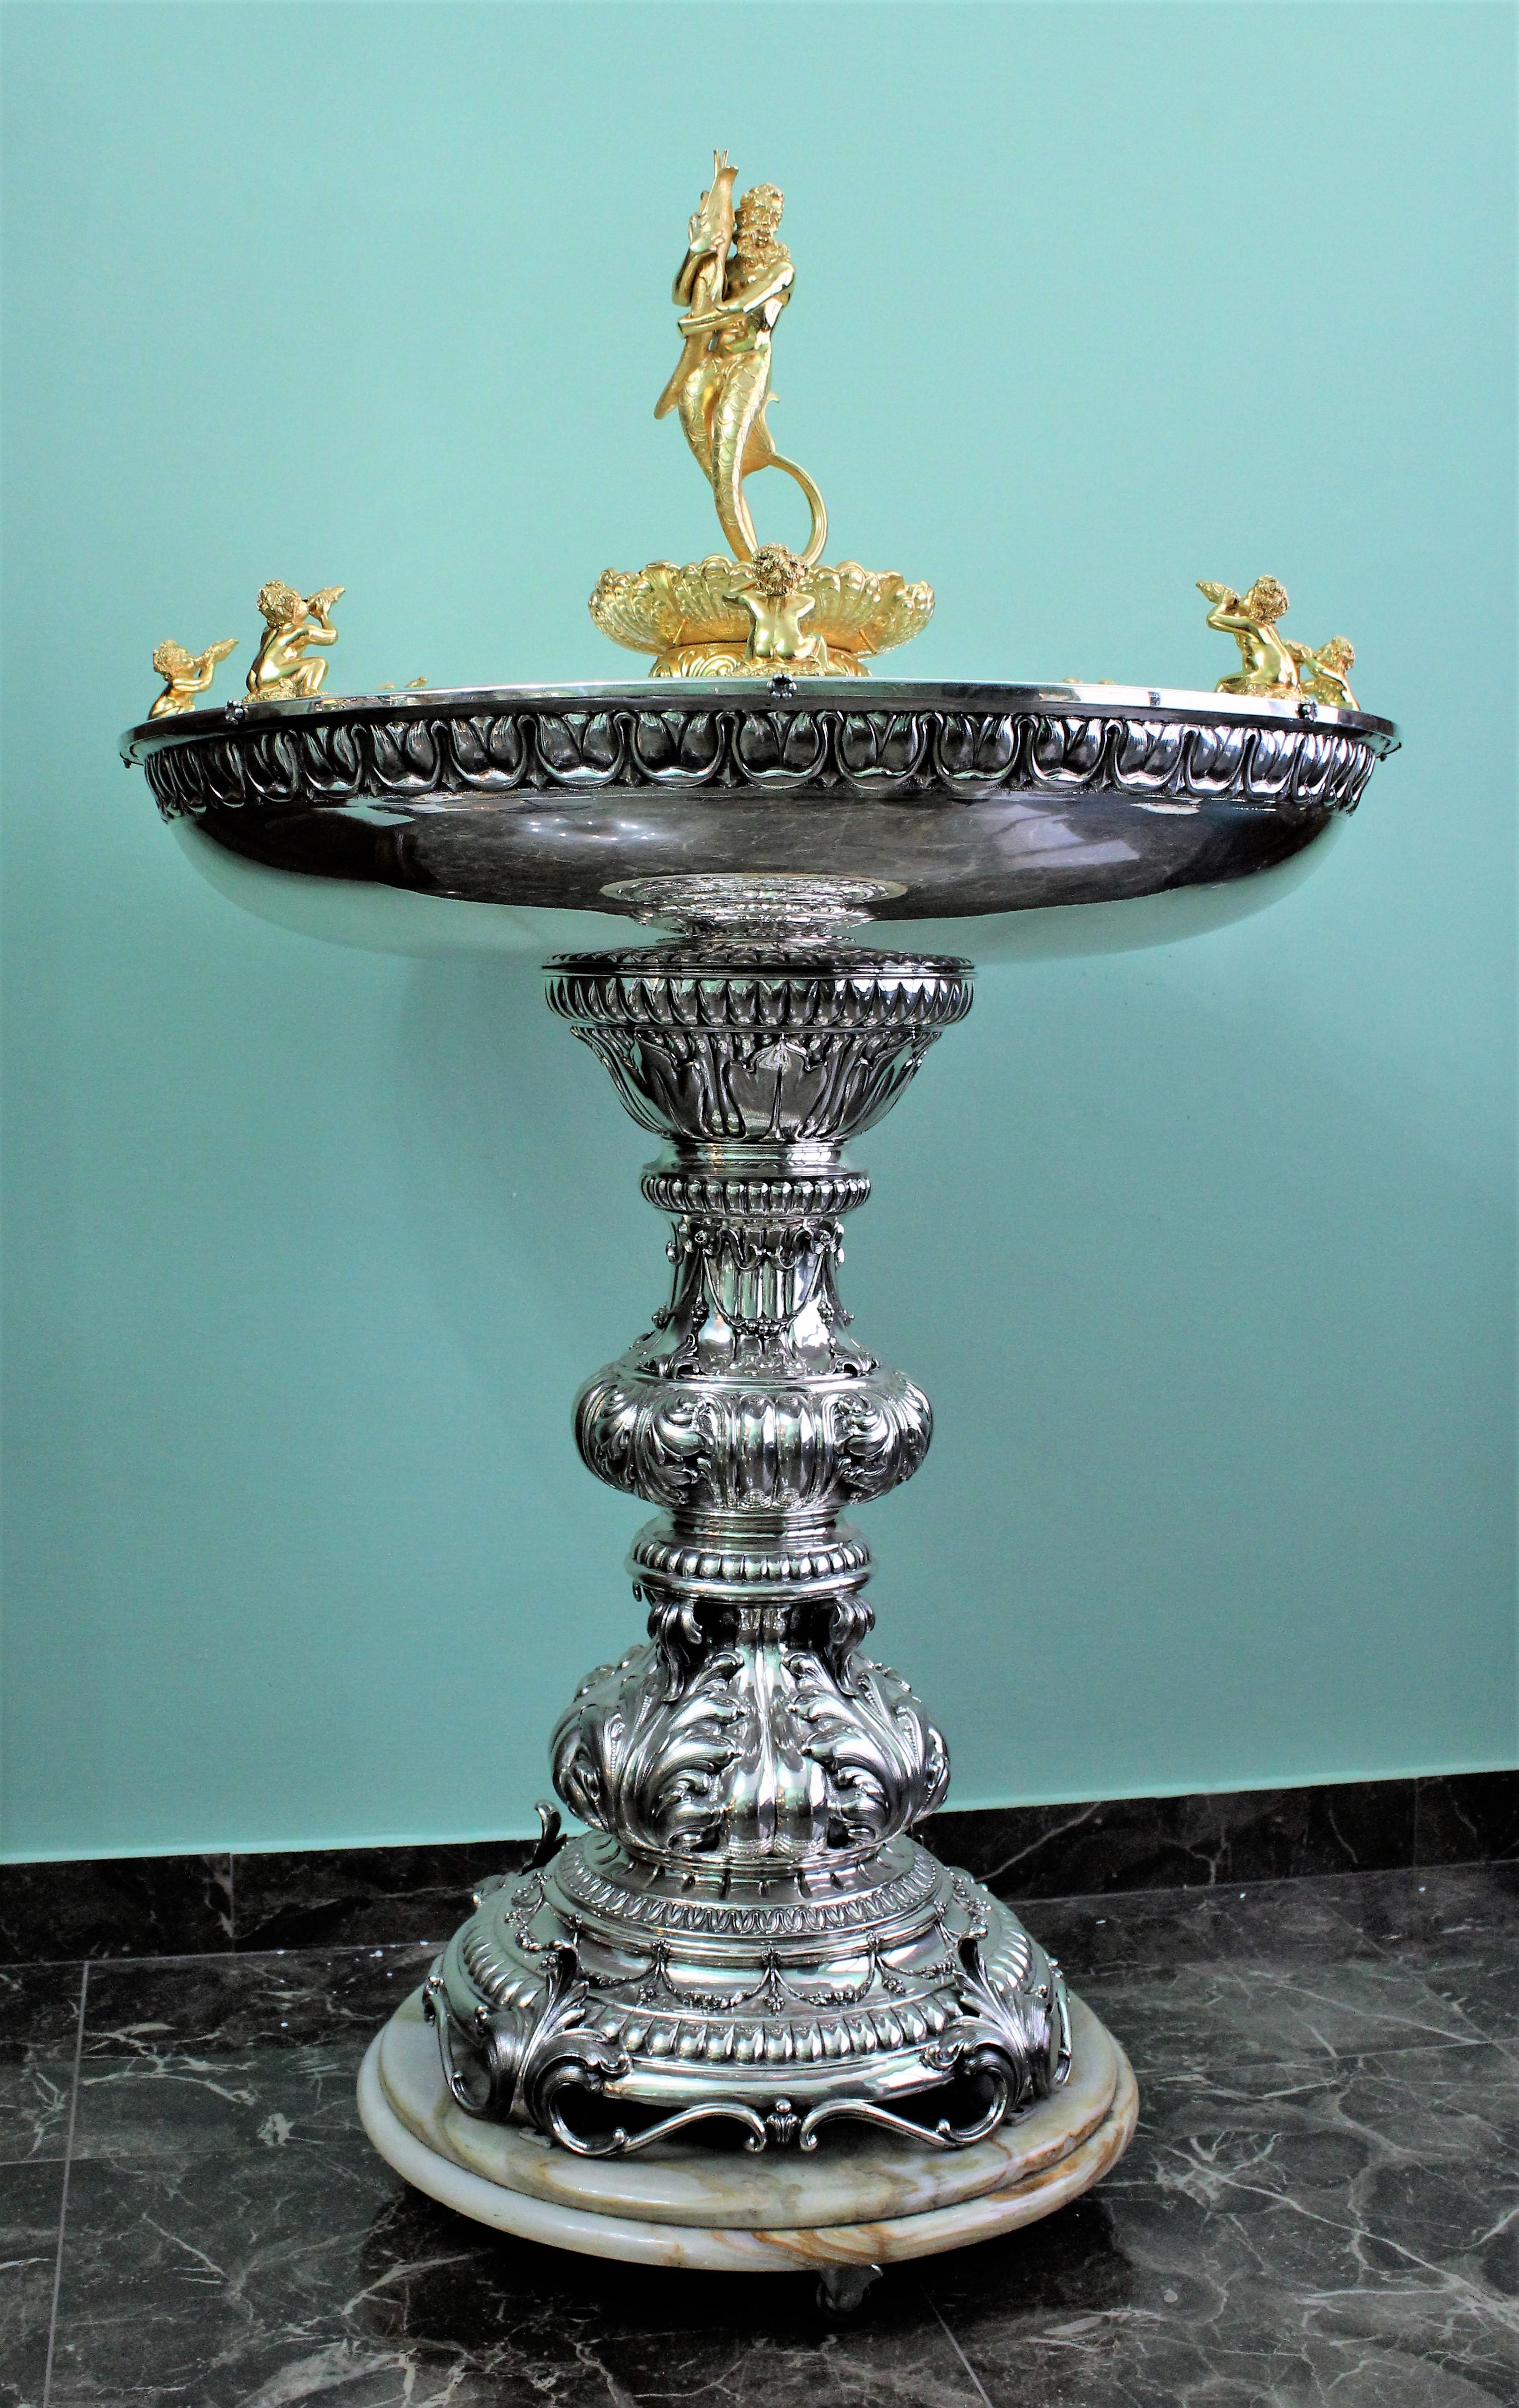 Magnificent silver fountain, realized in the early 1950s


Circular marble base with wheels for moving.

Worked by hand embossed and engraved. 

Round fountain engraved with sea rocks and waves on the inside

8 little cherubs sorround the